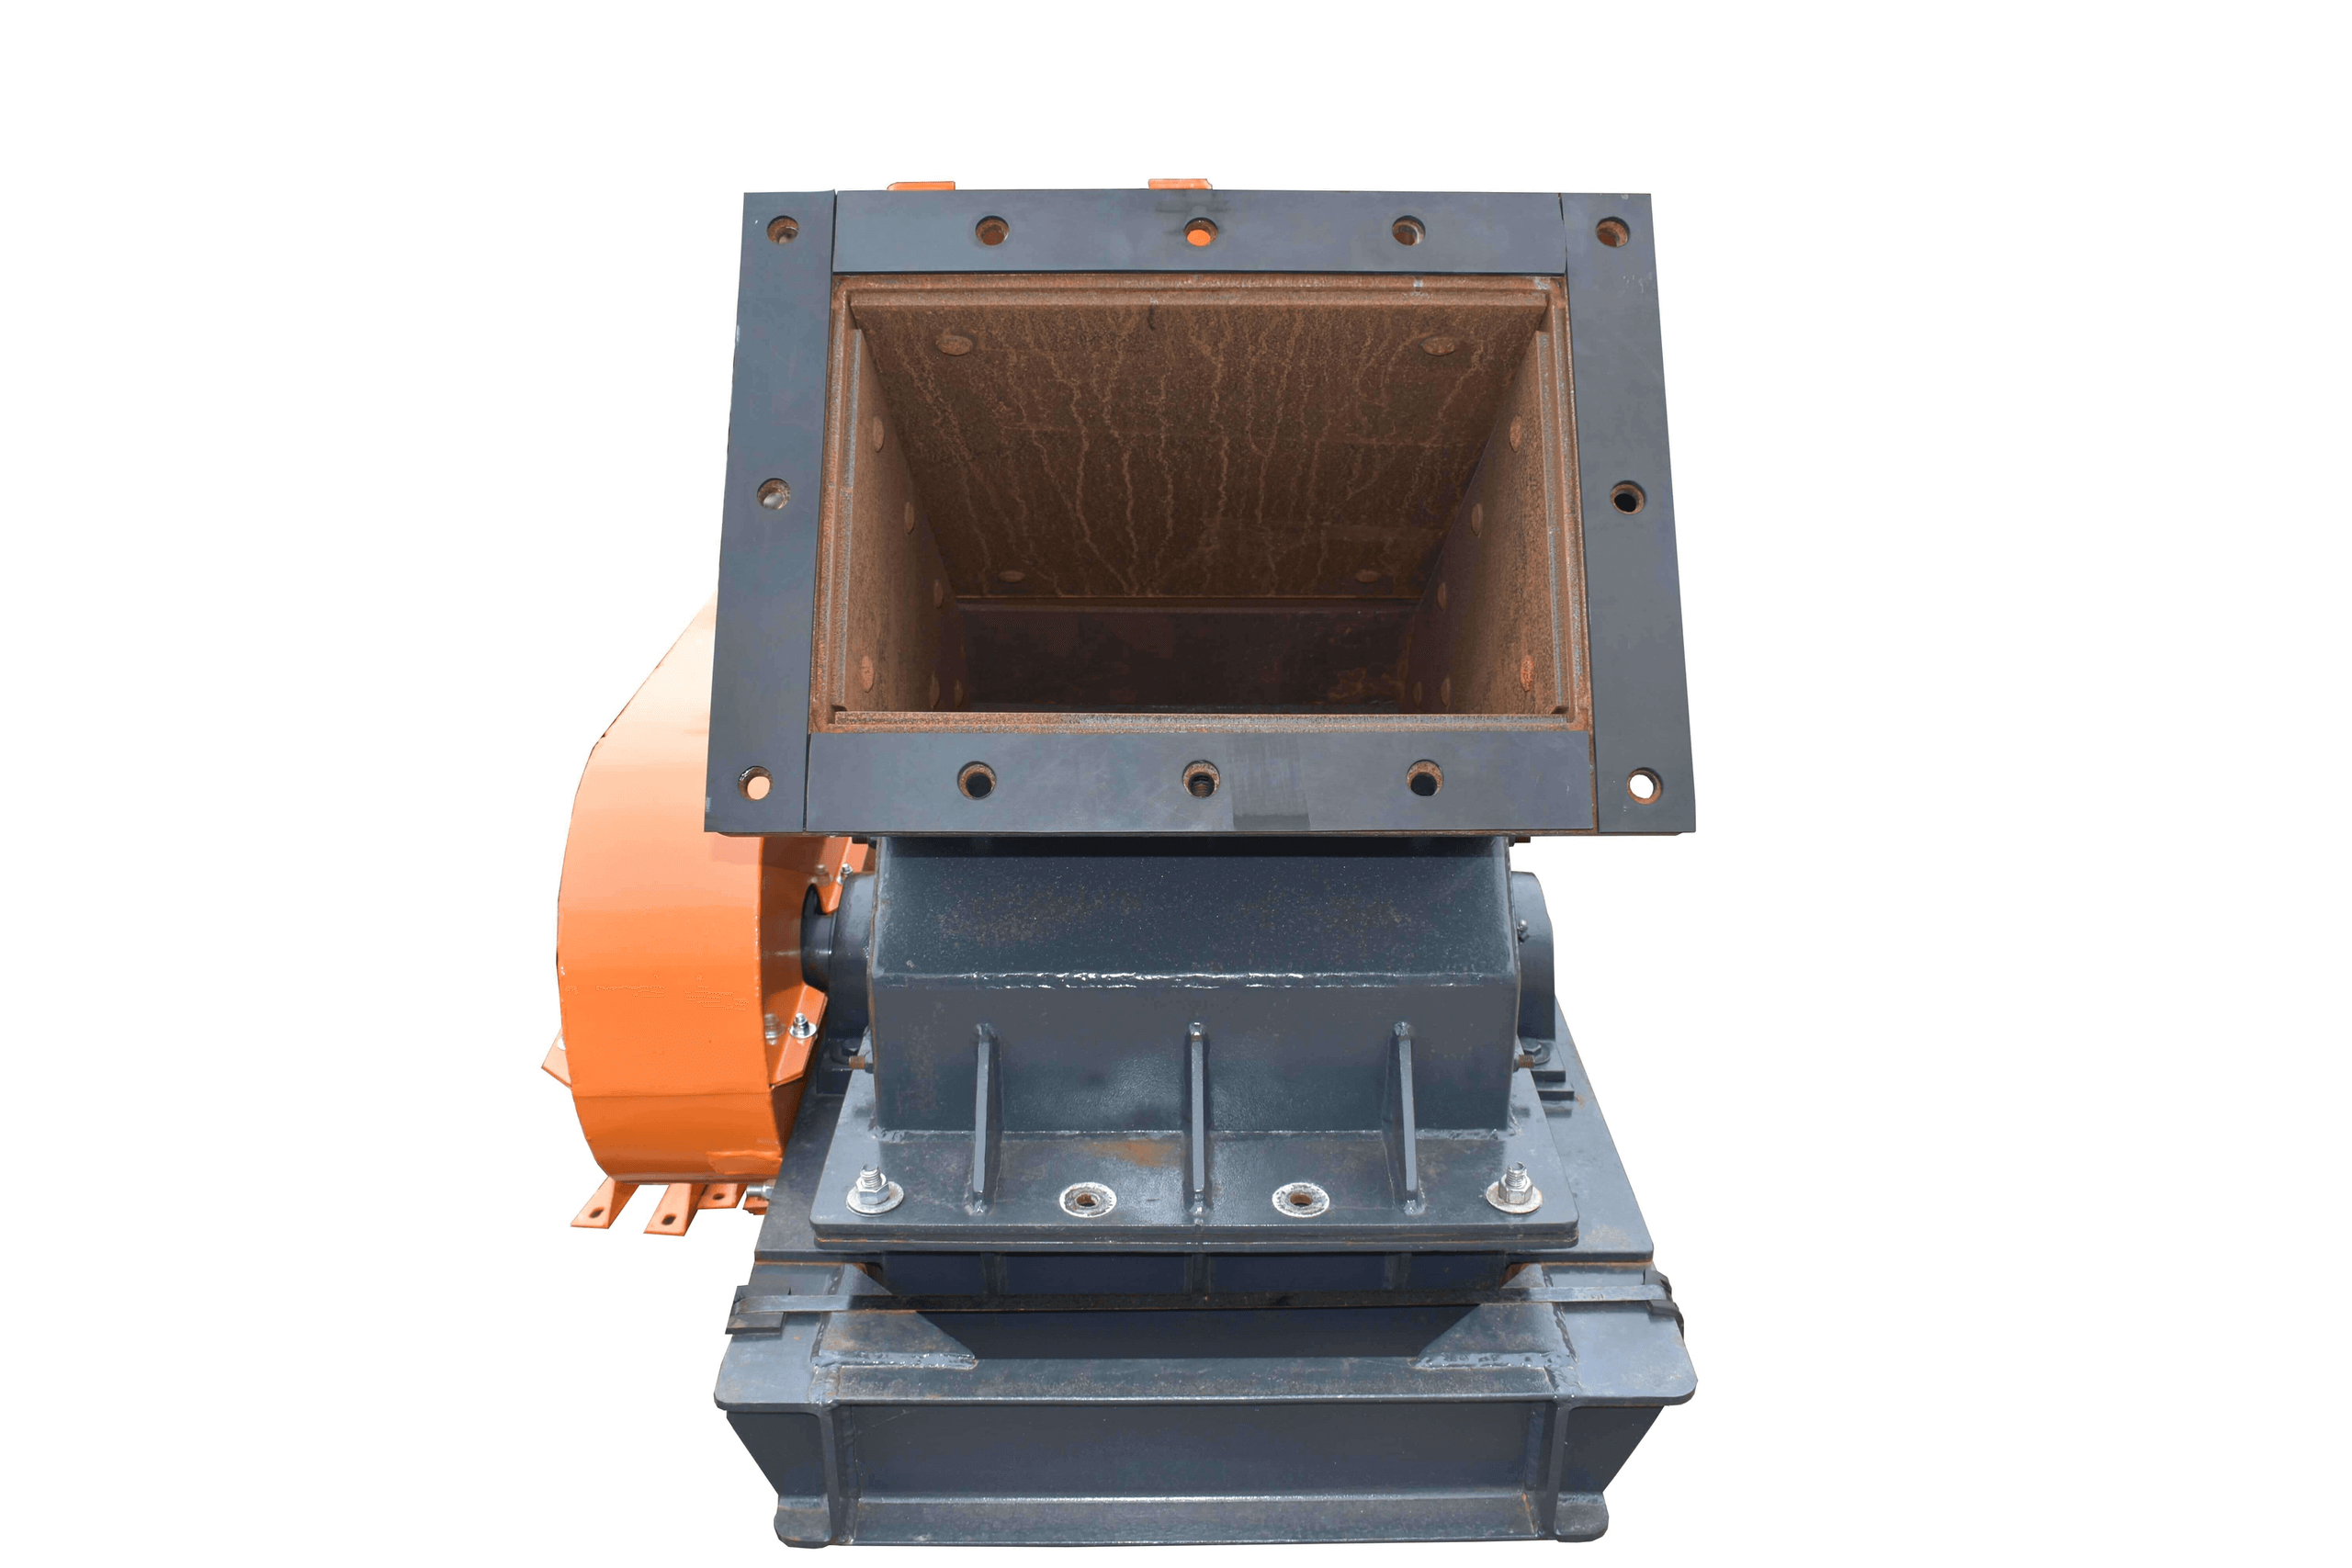 A hammer mill with turn-key ore processing system